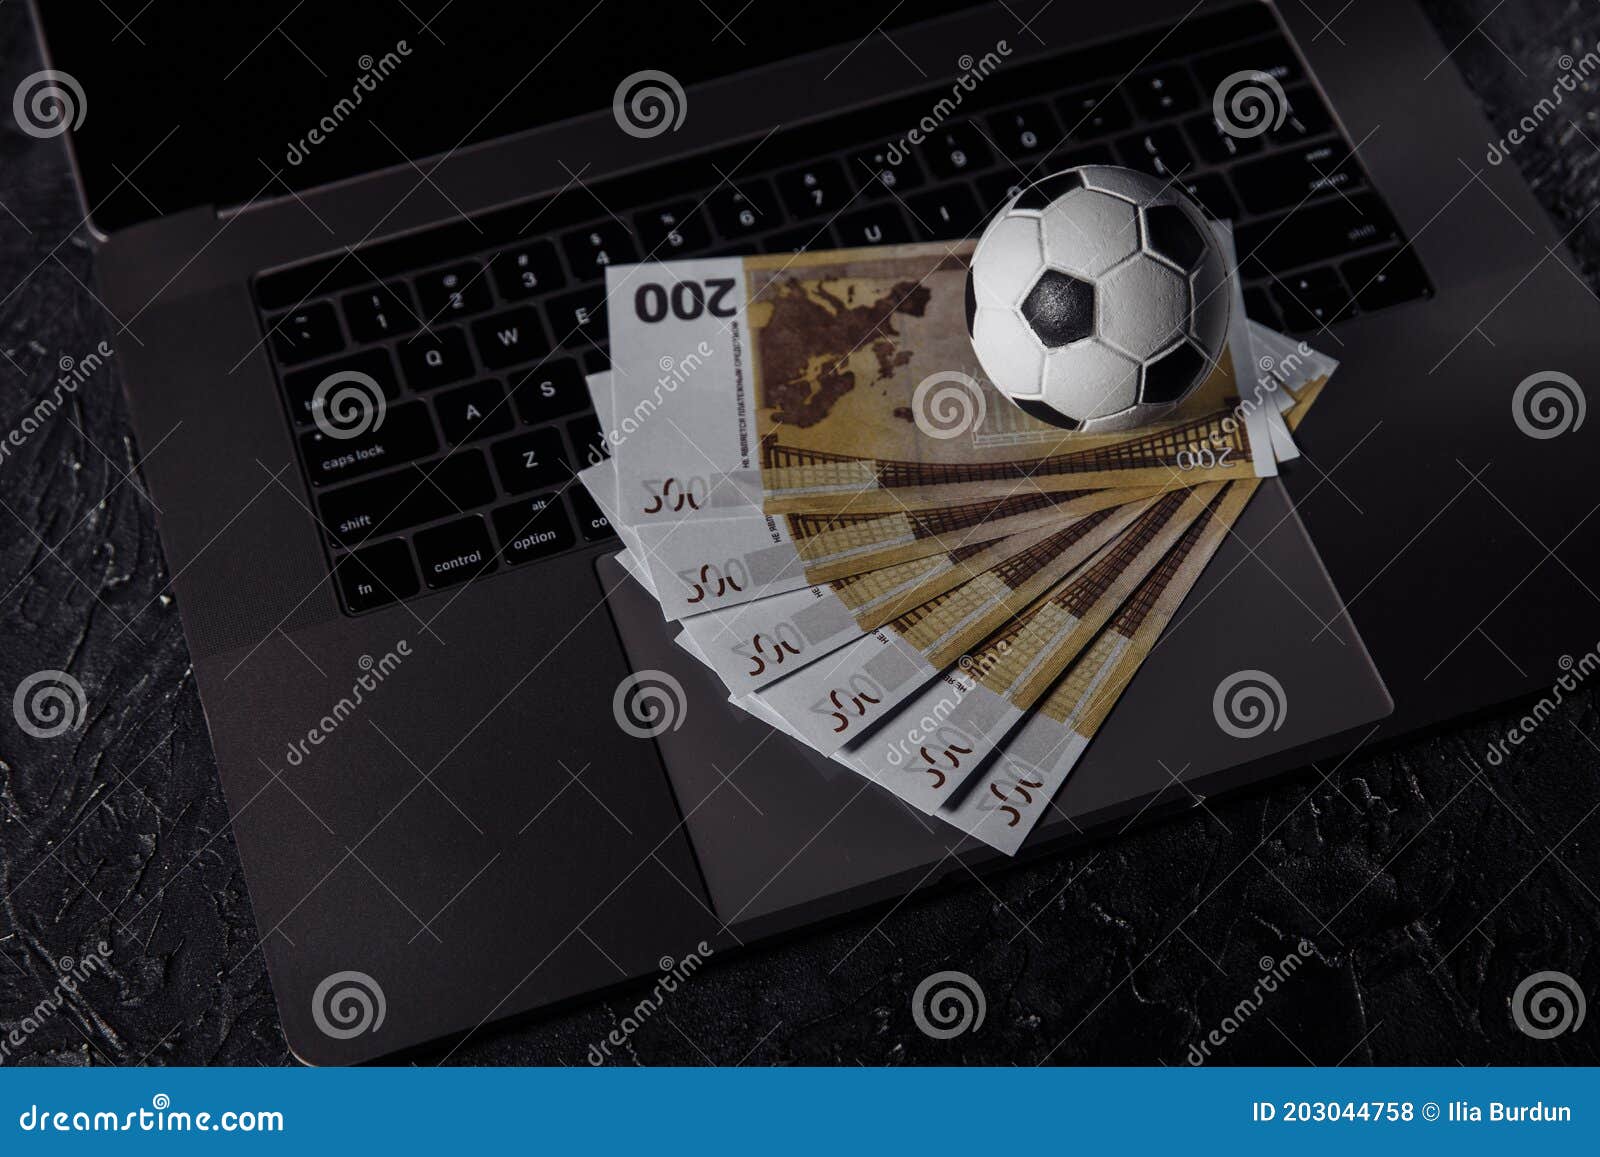 bets, sports betting, bookmaker. soccer ball and money on a laptop`s keyboard